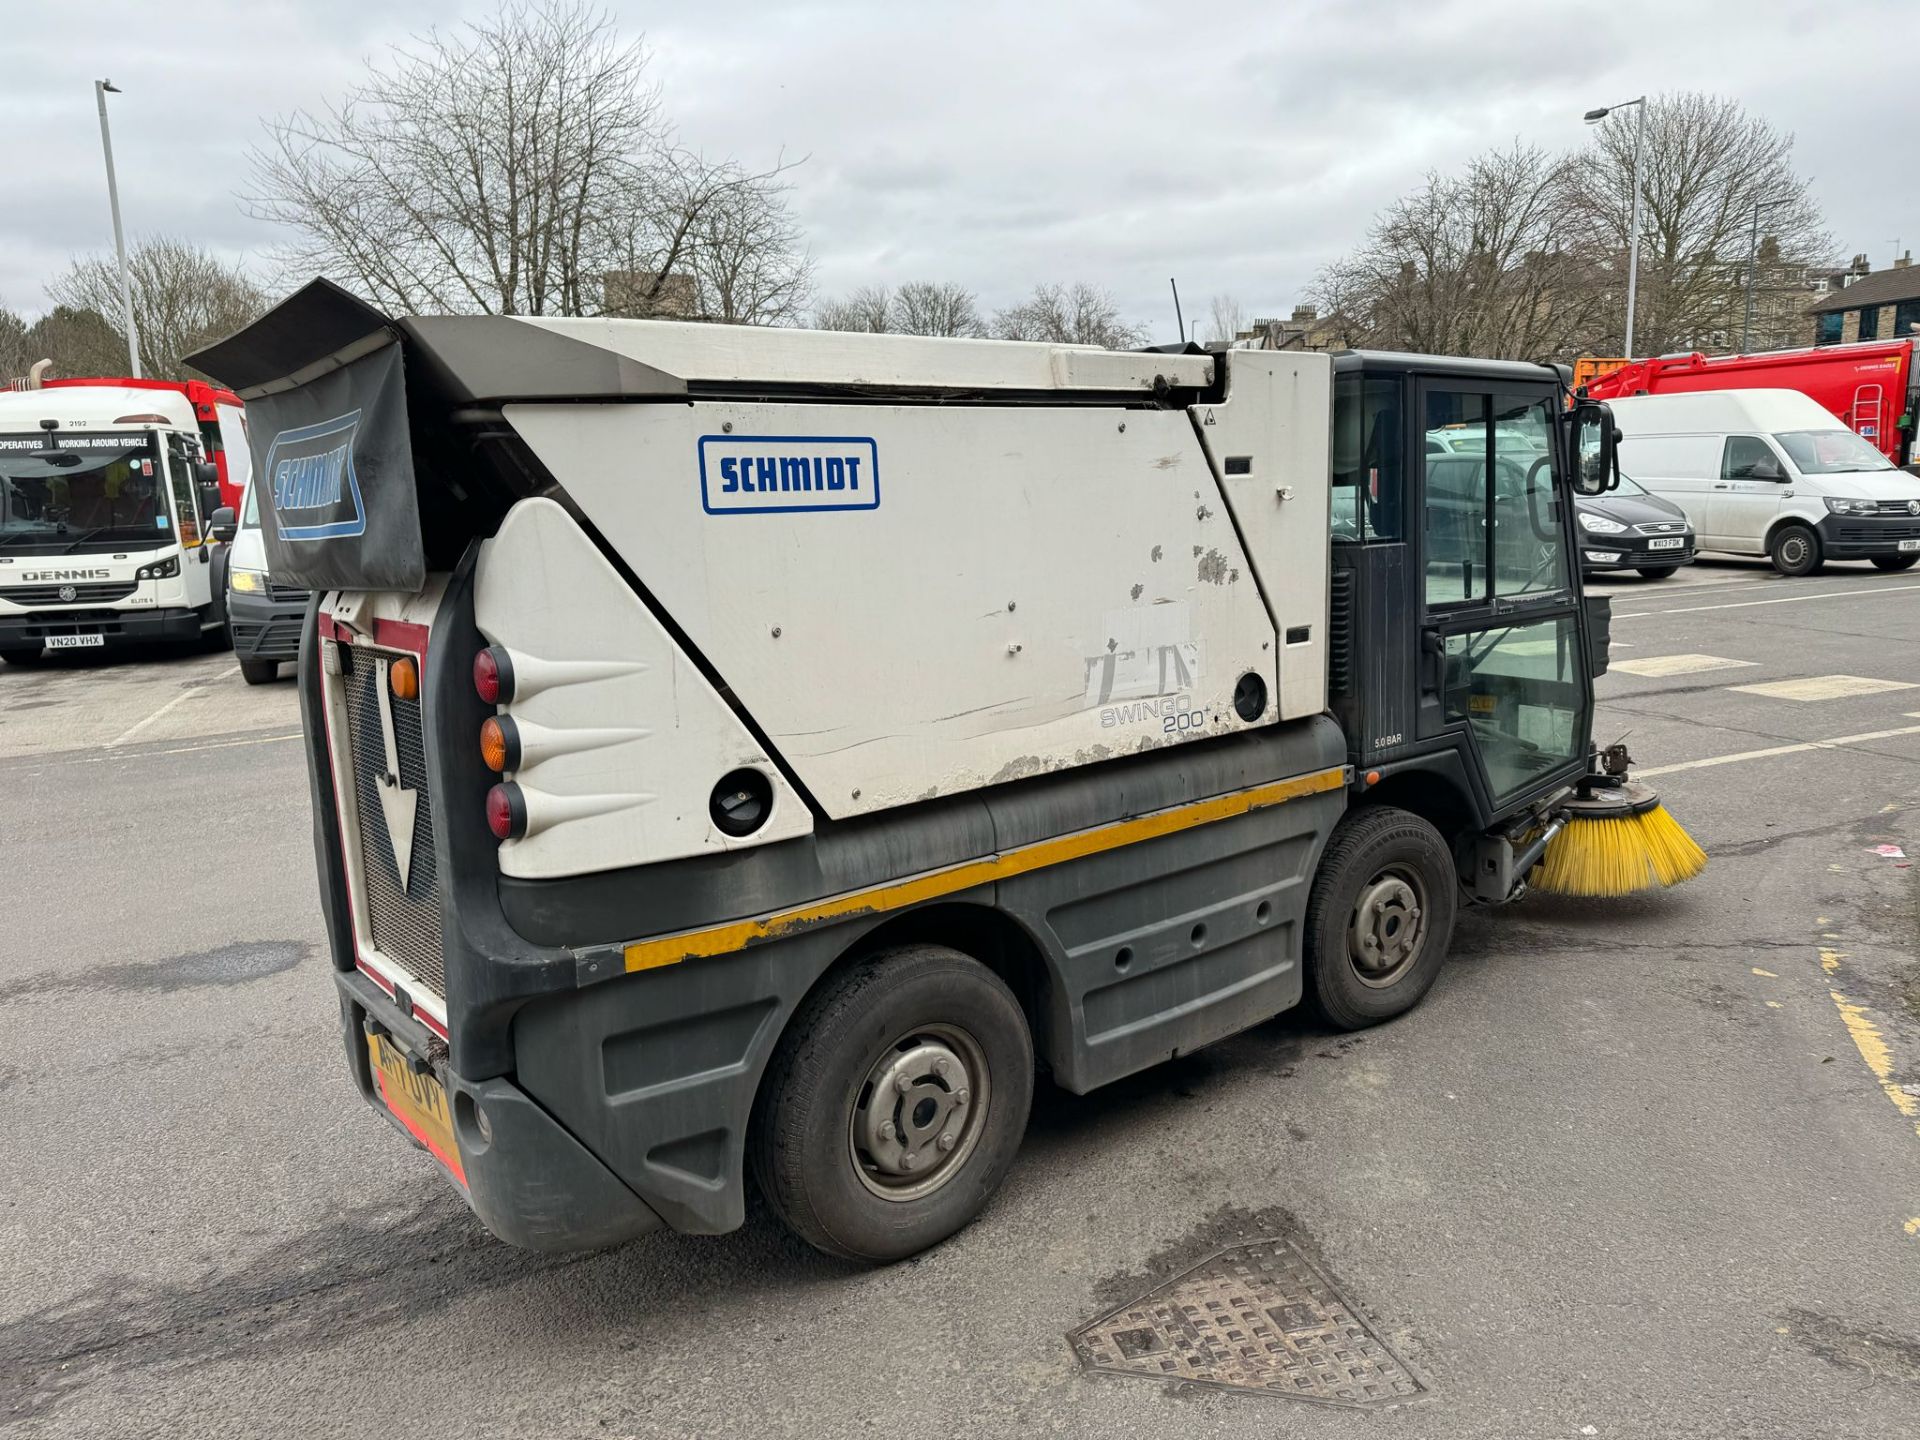 2017, SCHMIDT - Compact Road Sweeper (Ex-Council fleet owned and maintained) - Image 4 of 32